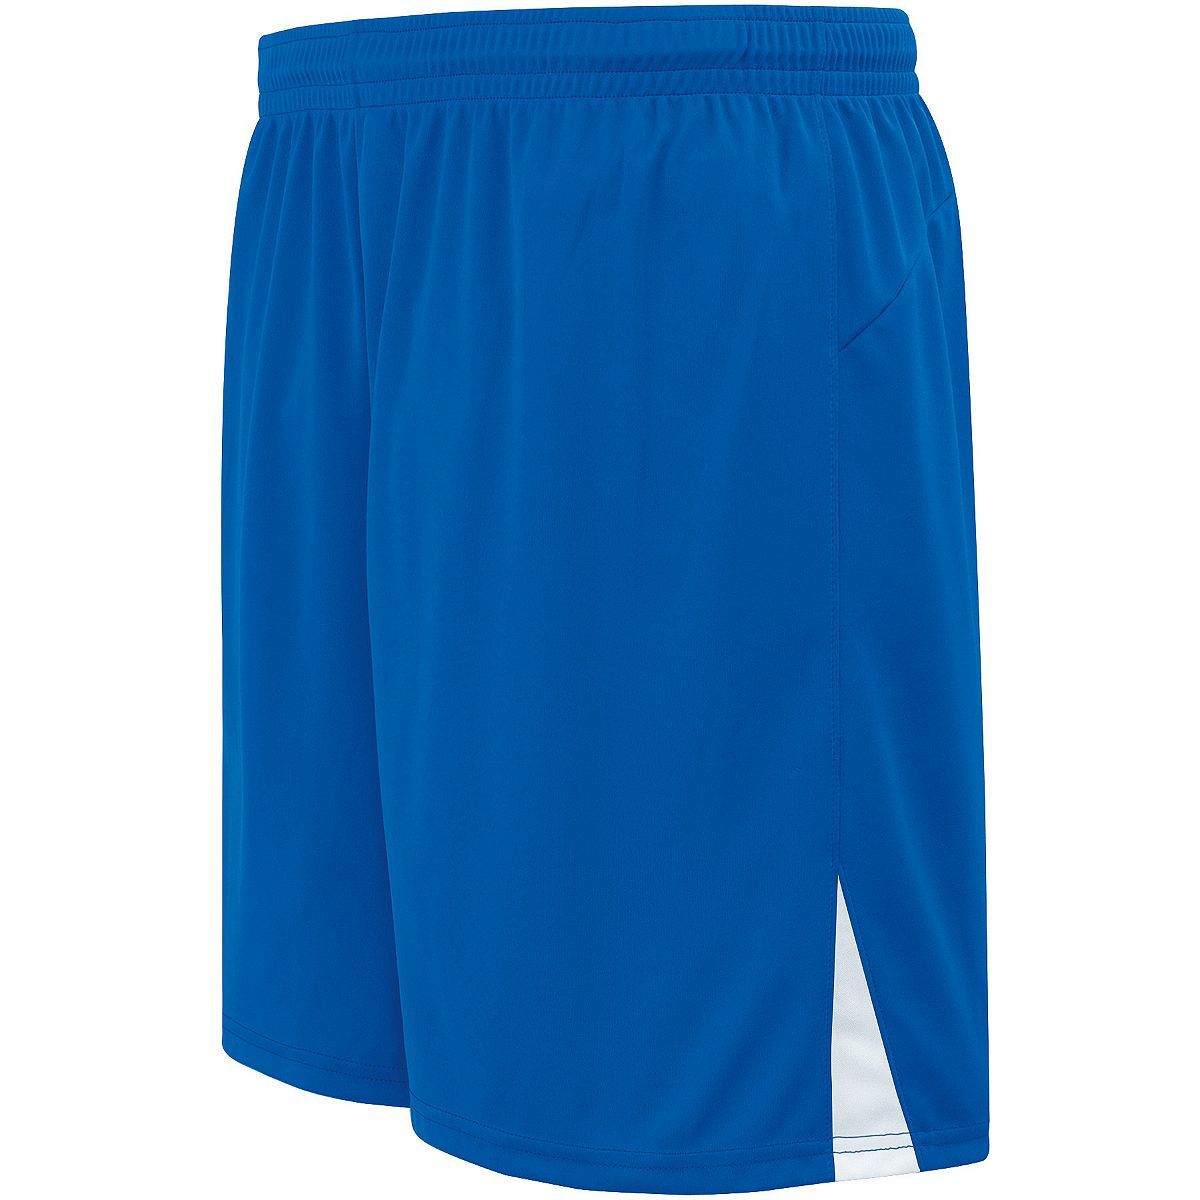 High 5 Youth Hawk Shorts in Royal/White  -Part of the Youth, Youth-Shorts, High5-Products, Soccer, All-Sports-1 product lines at KanaleyCreations.com